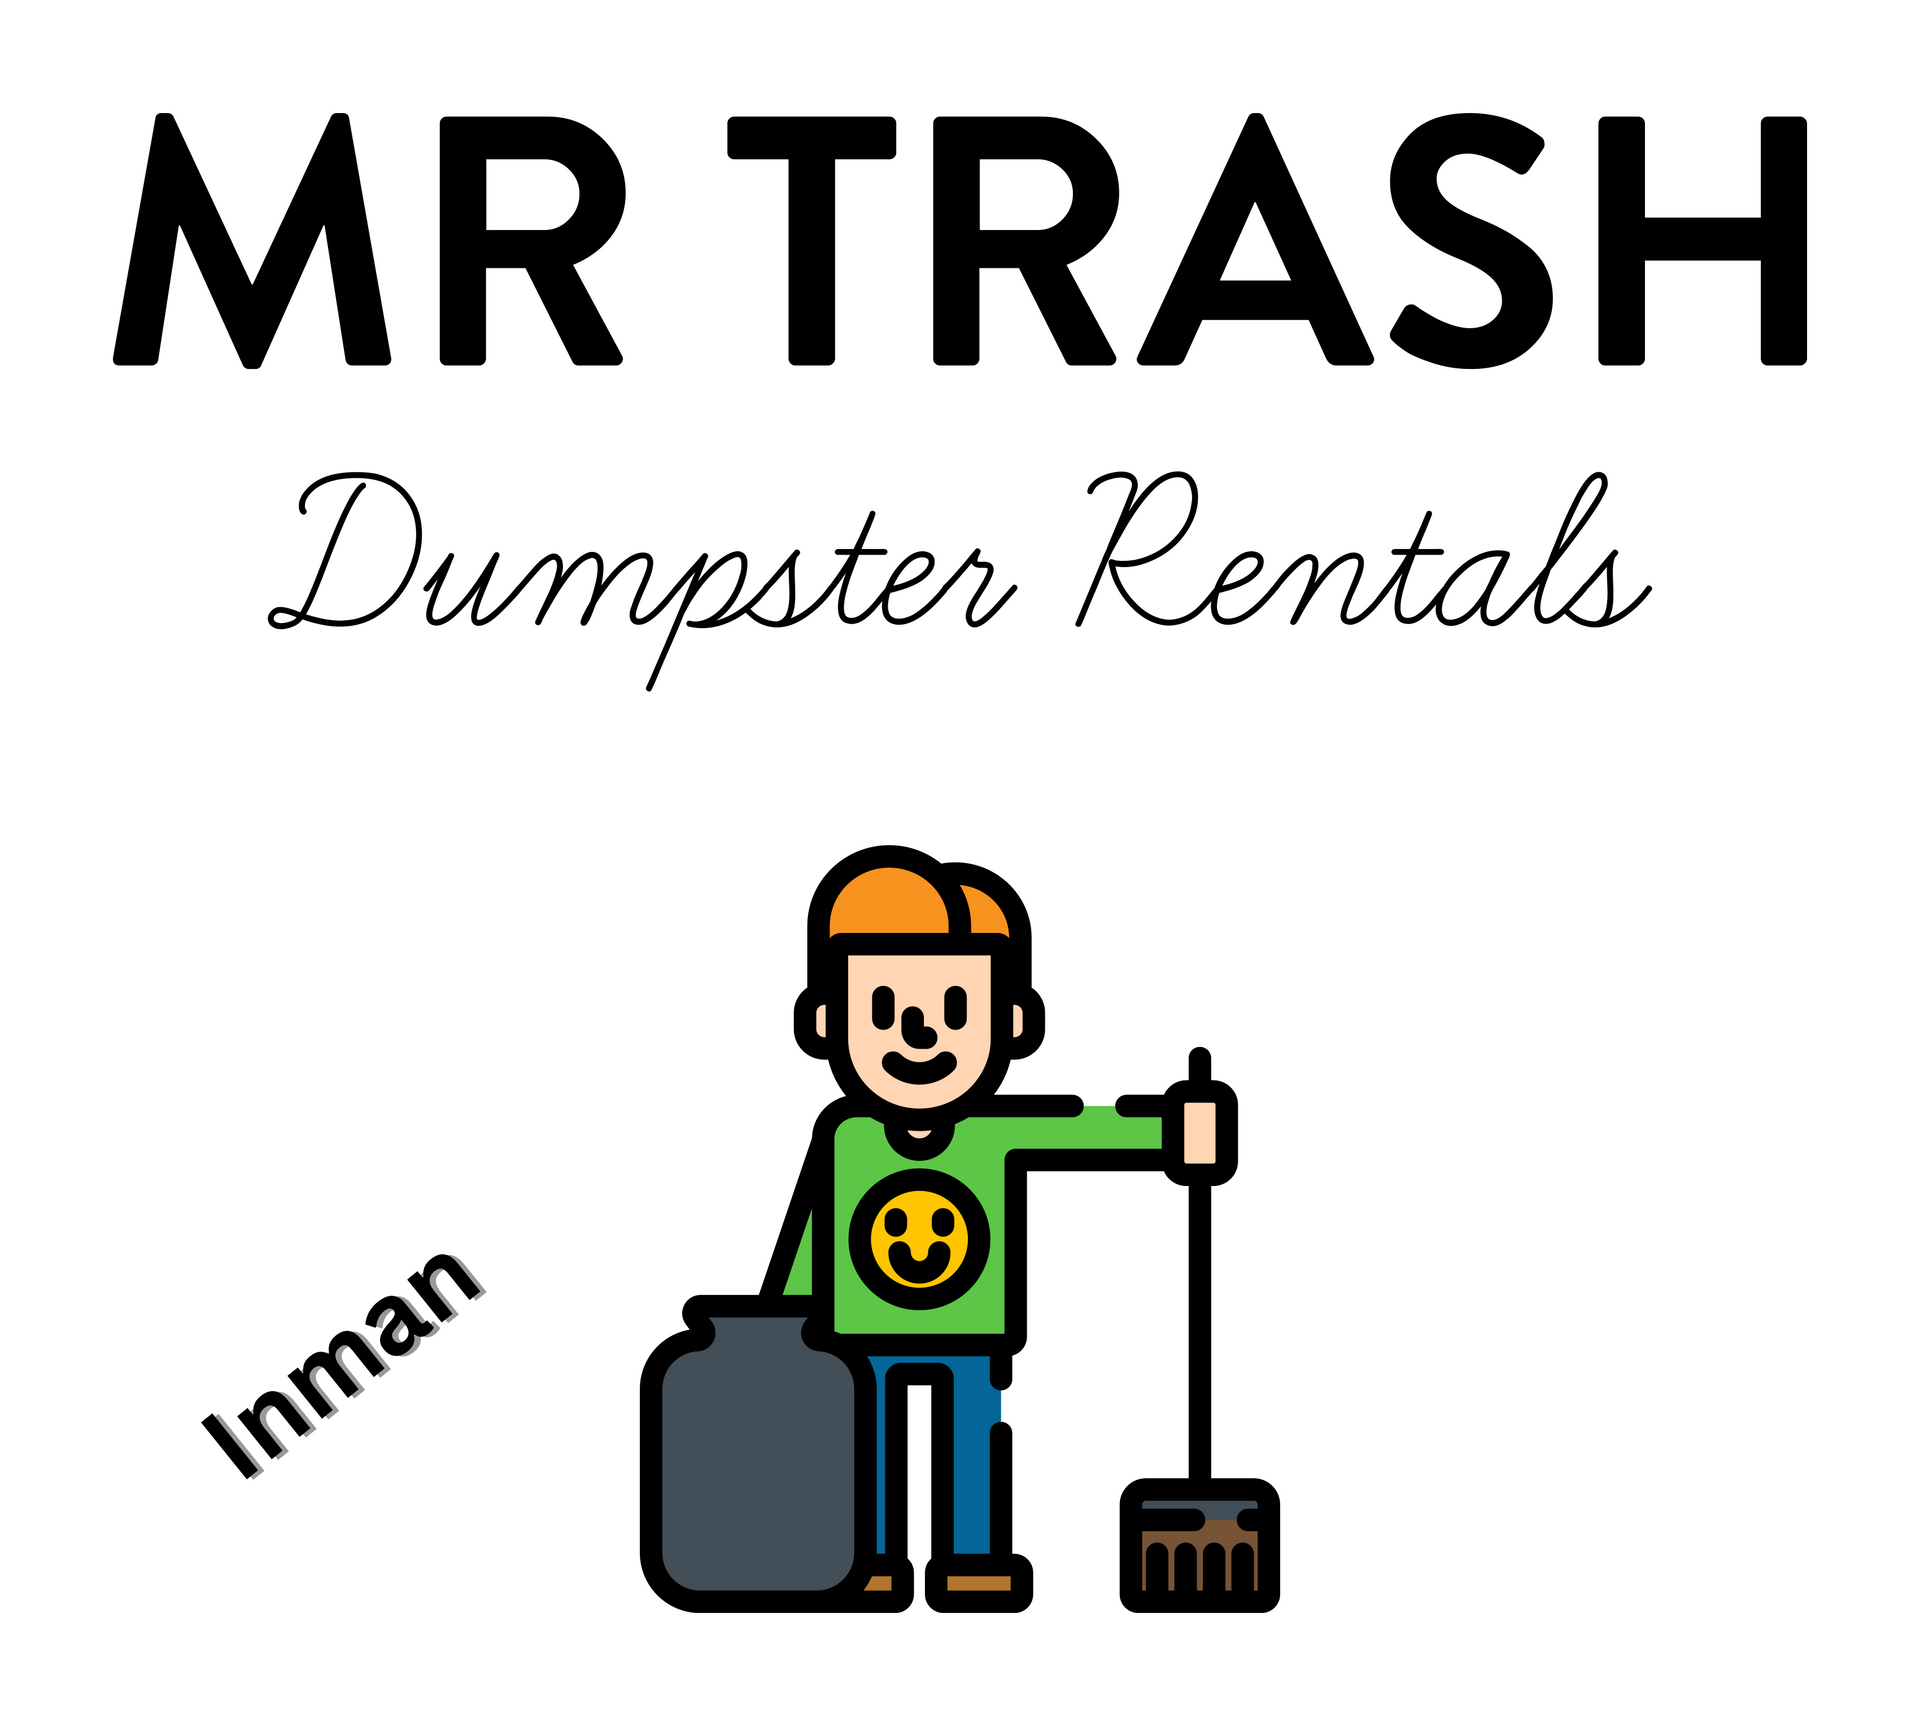 Mr. Trash Dumpster Rentals' logo: Representing our commitment to reliable and exceptional dumpster rentals in Spartanburg, SC, and beyond.